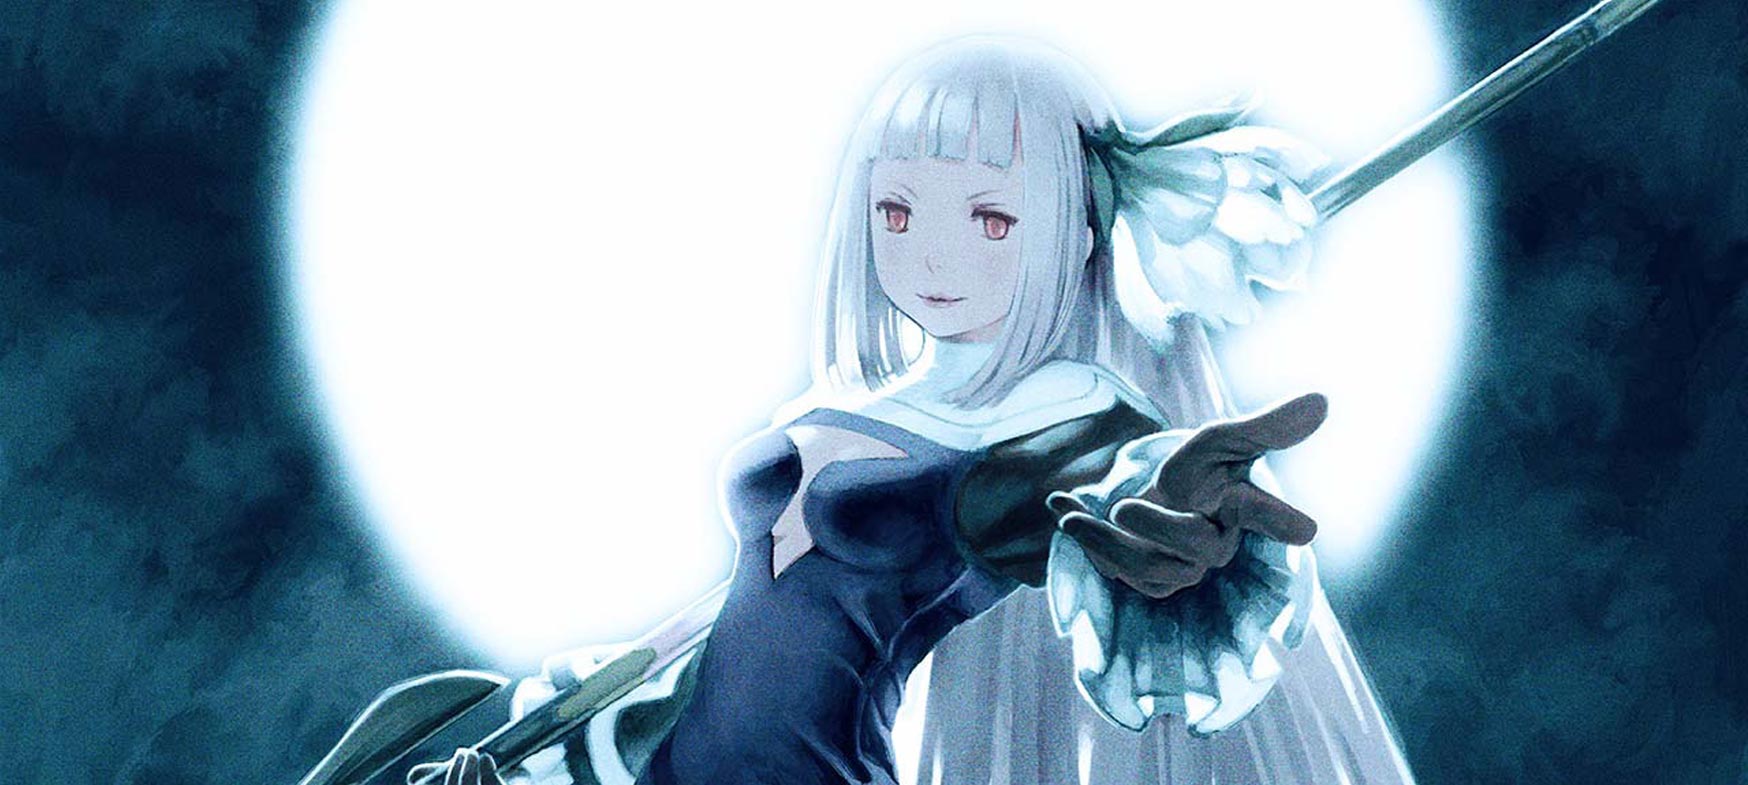 Bravely Second: End Layer's intro cinematic has Agnes and her